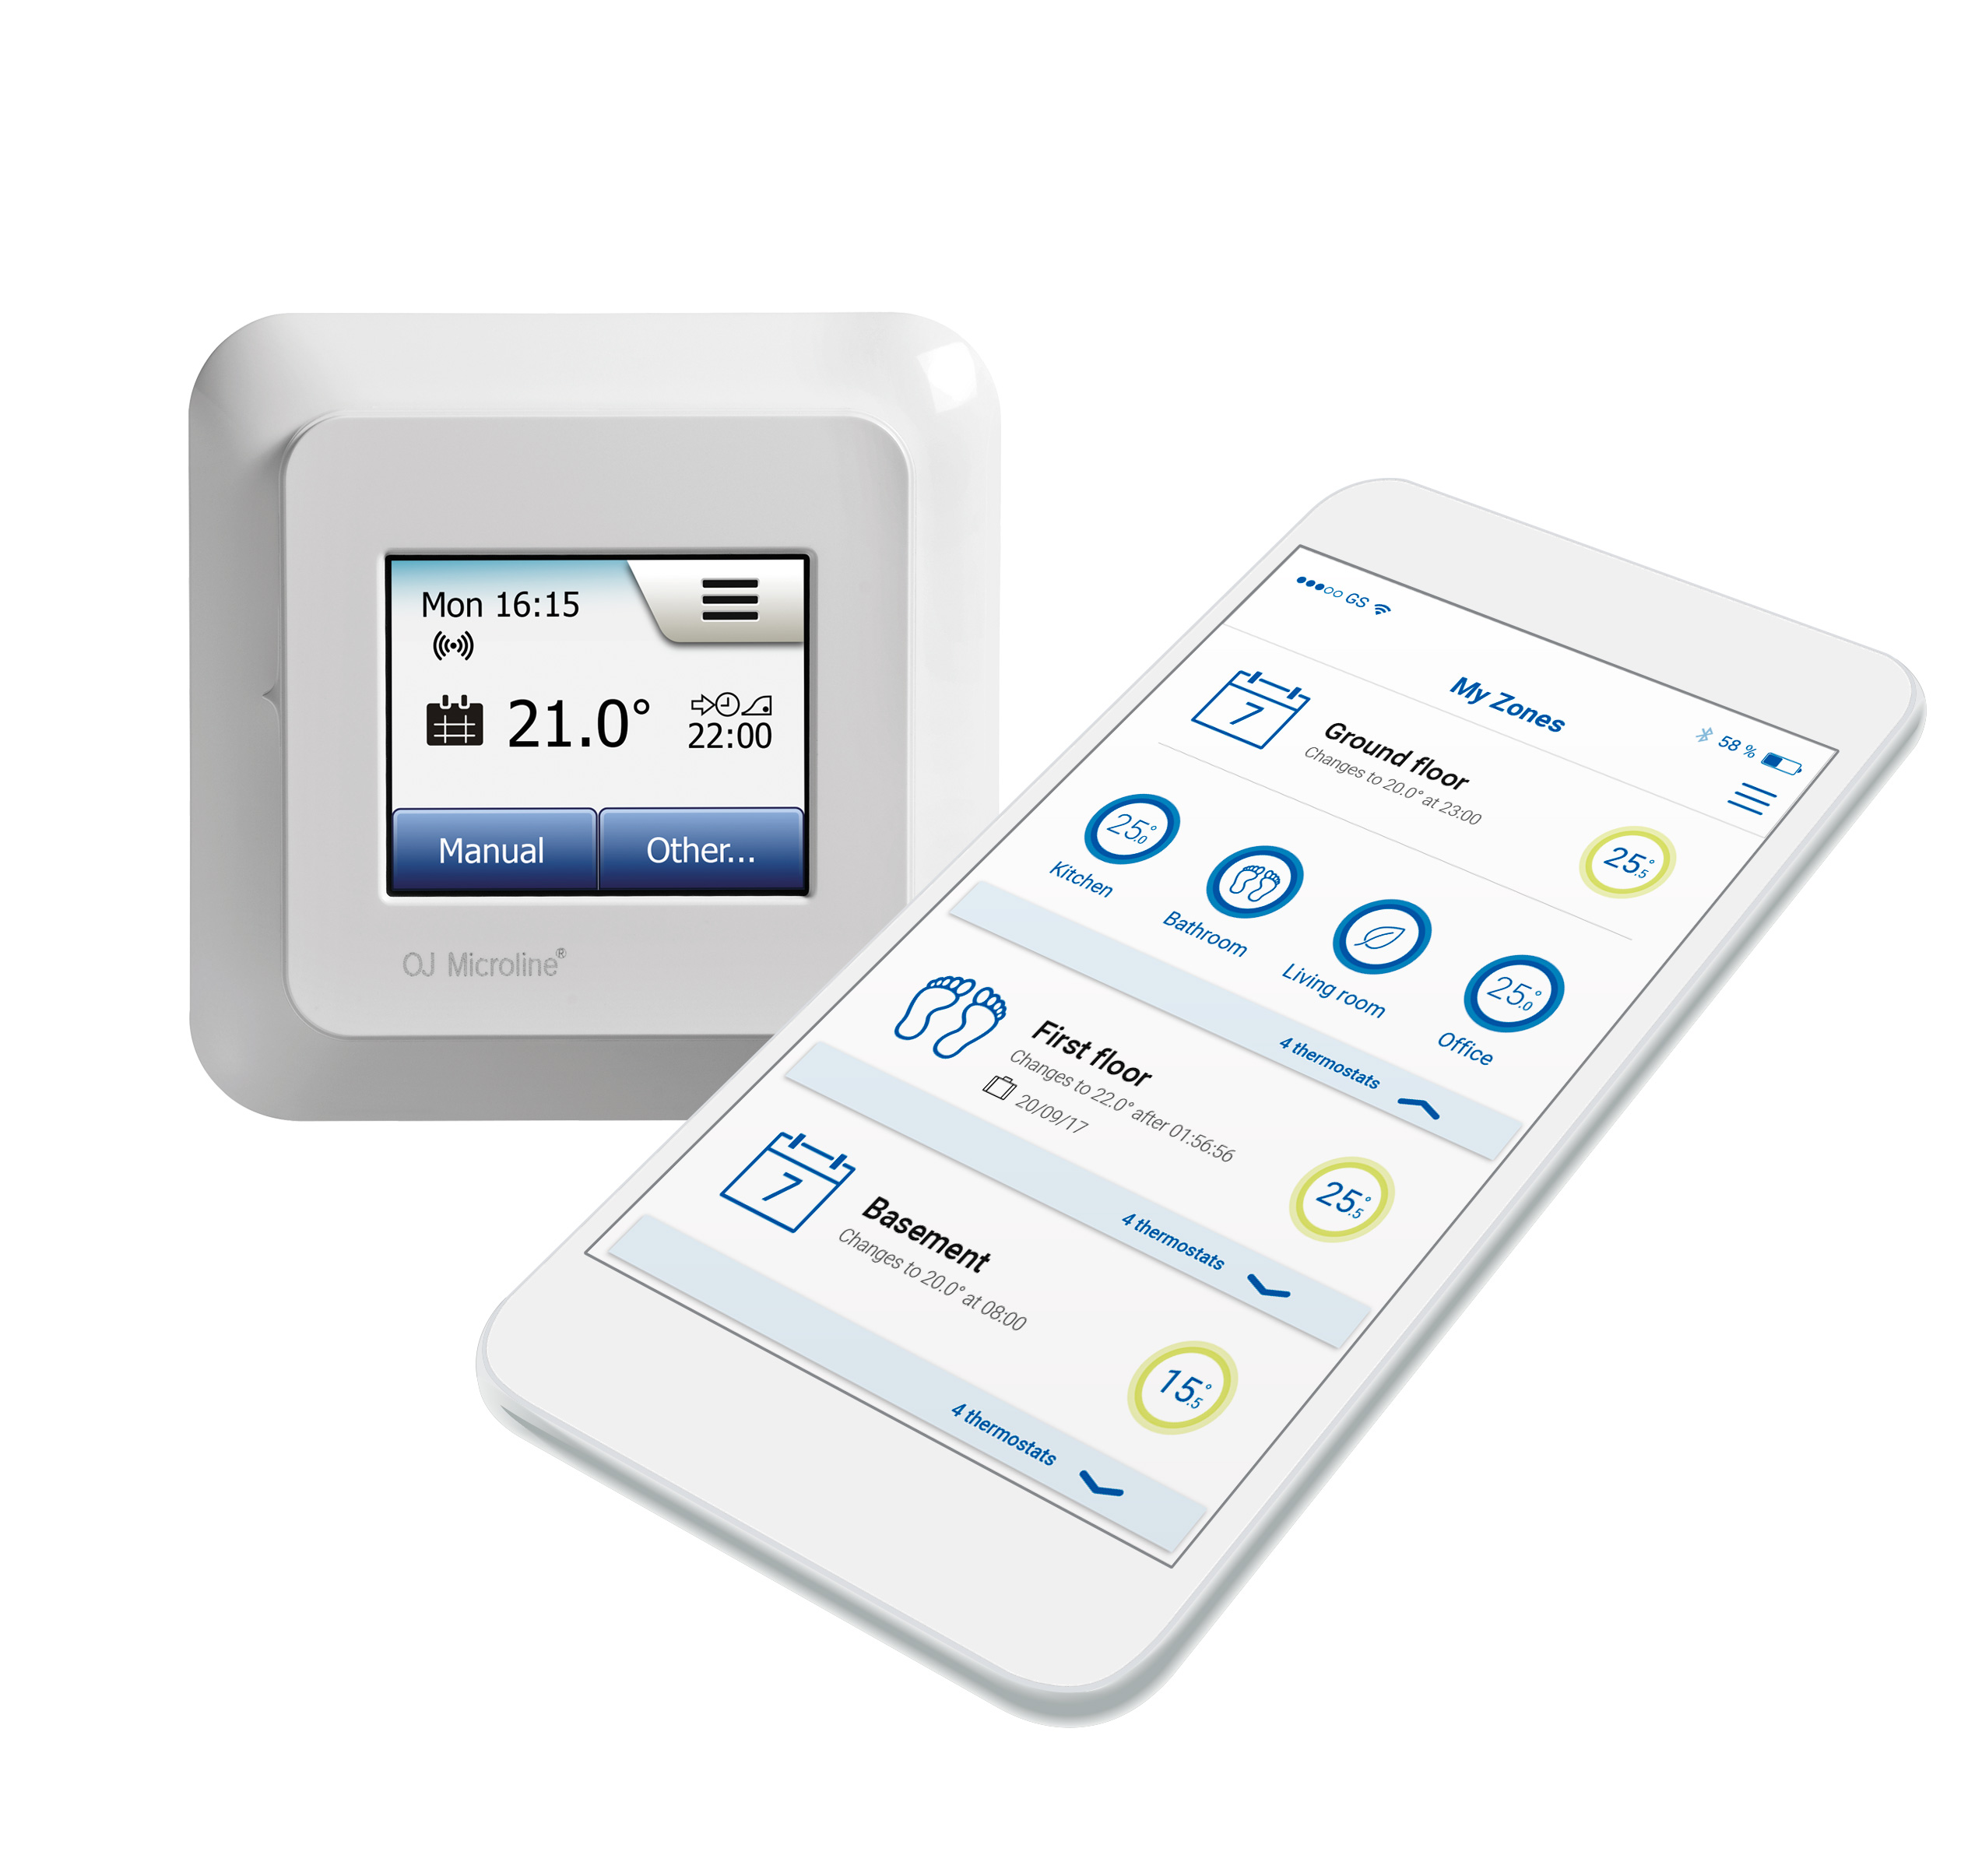 The Wifi version of the NGTouch thermostat 